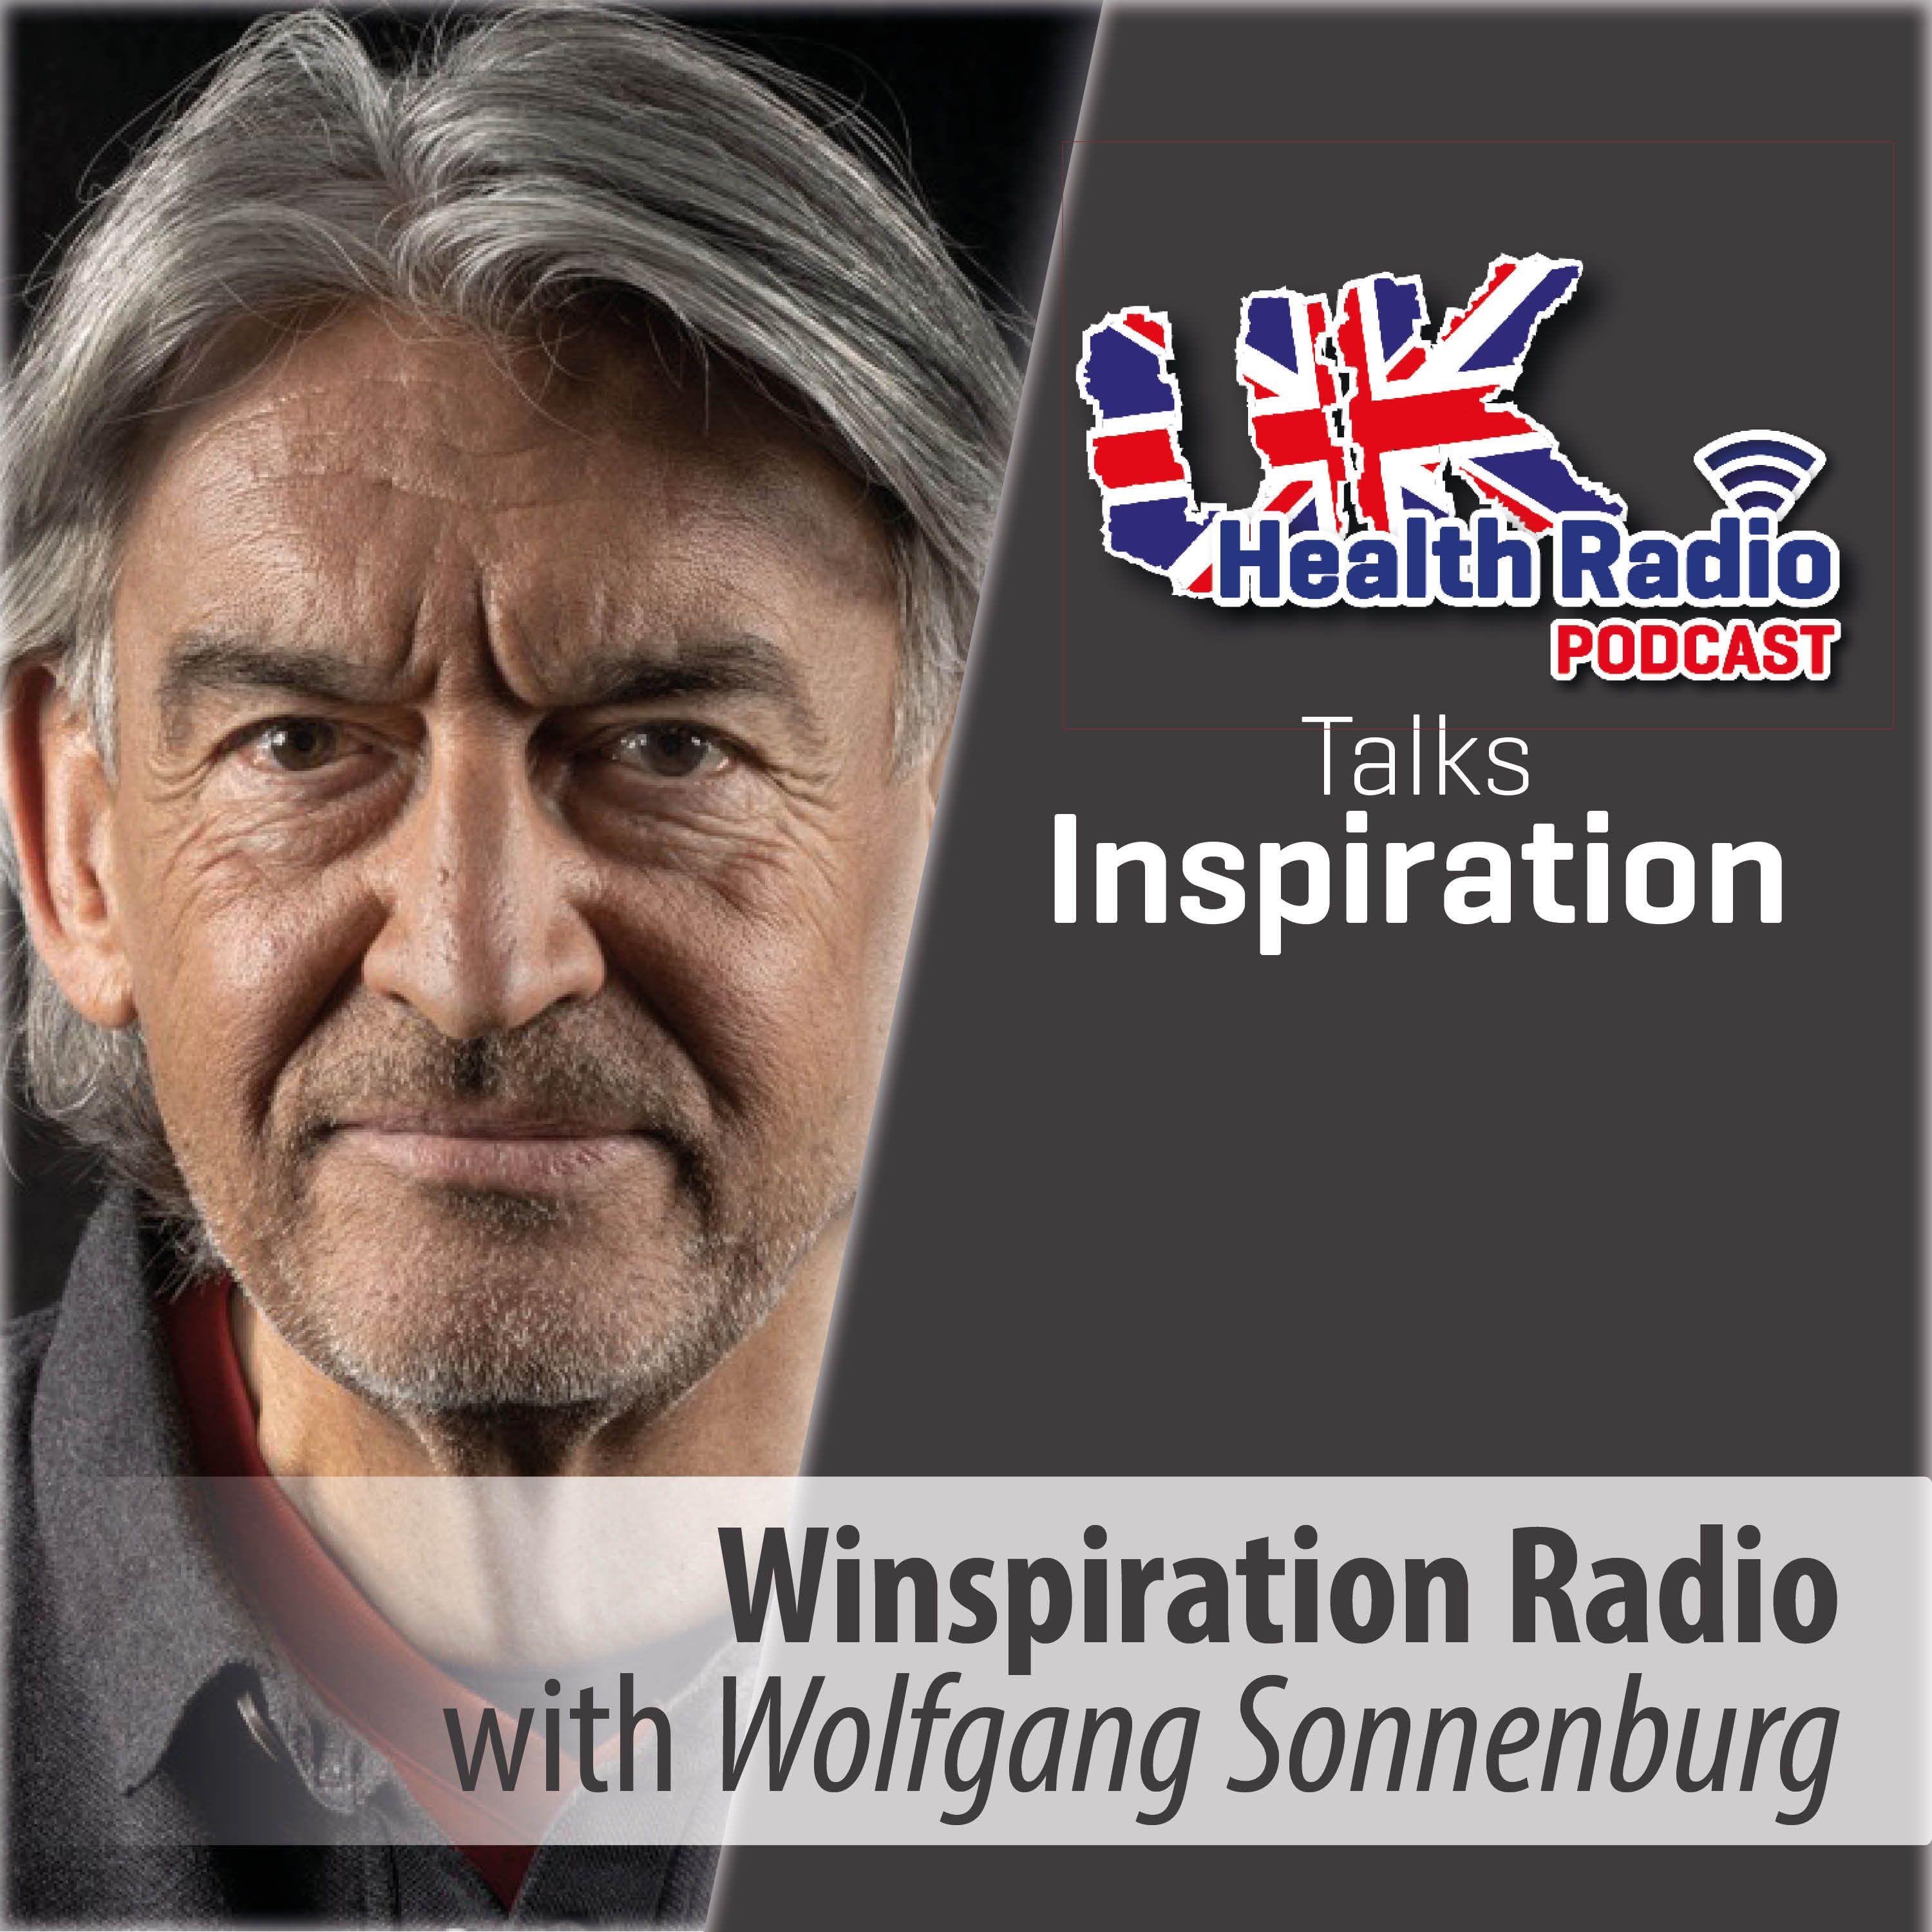 72: Winspiration Radio - Growth Principles for Humanity in Progress with Wolfgang Sonnenburg - Episode 72